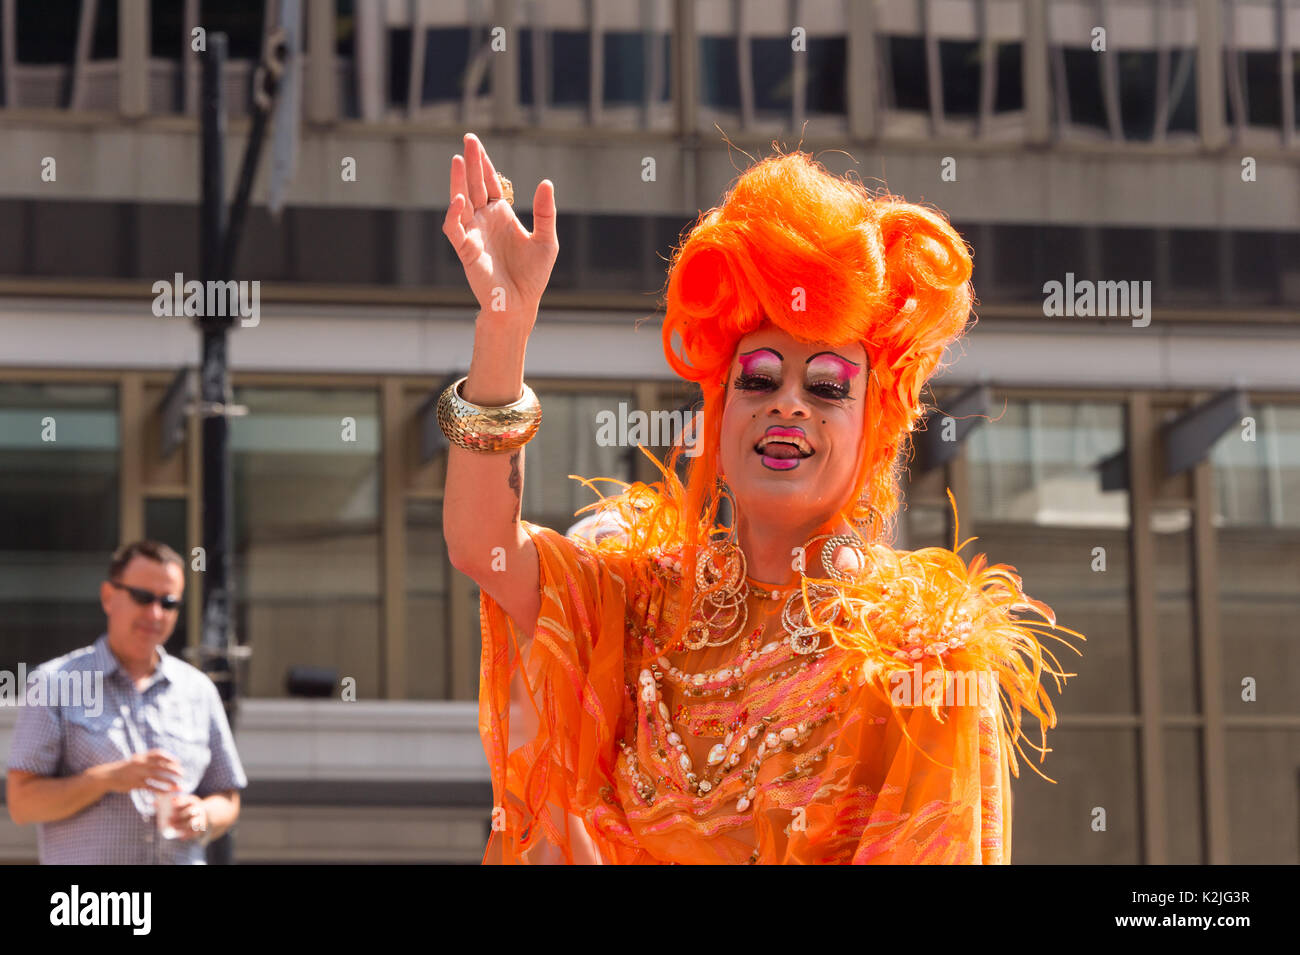 Montreal, CA - 20 August 2017: Mado at Montreal Pride Parade. Mado is a famous drag-queen who runs a drag cabaret, Cabaret Mado, in the Village Stock Photo